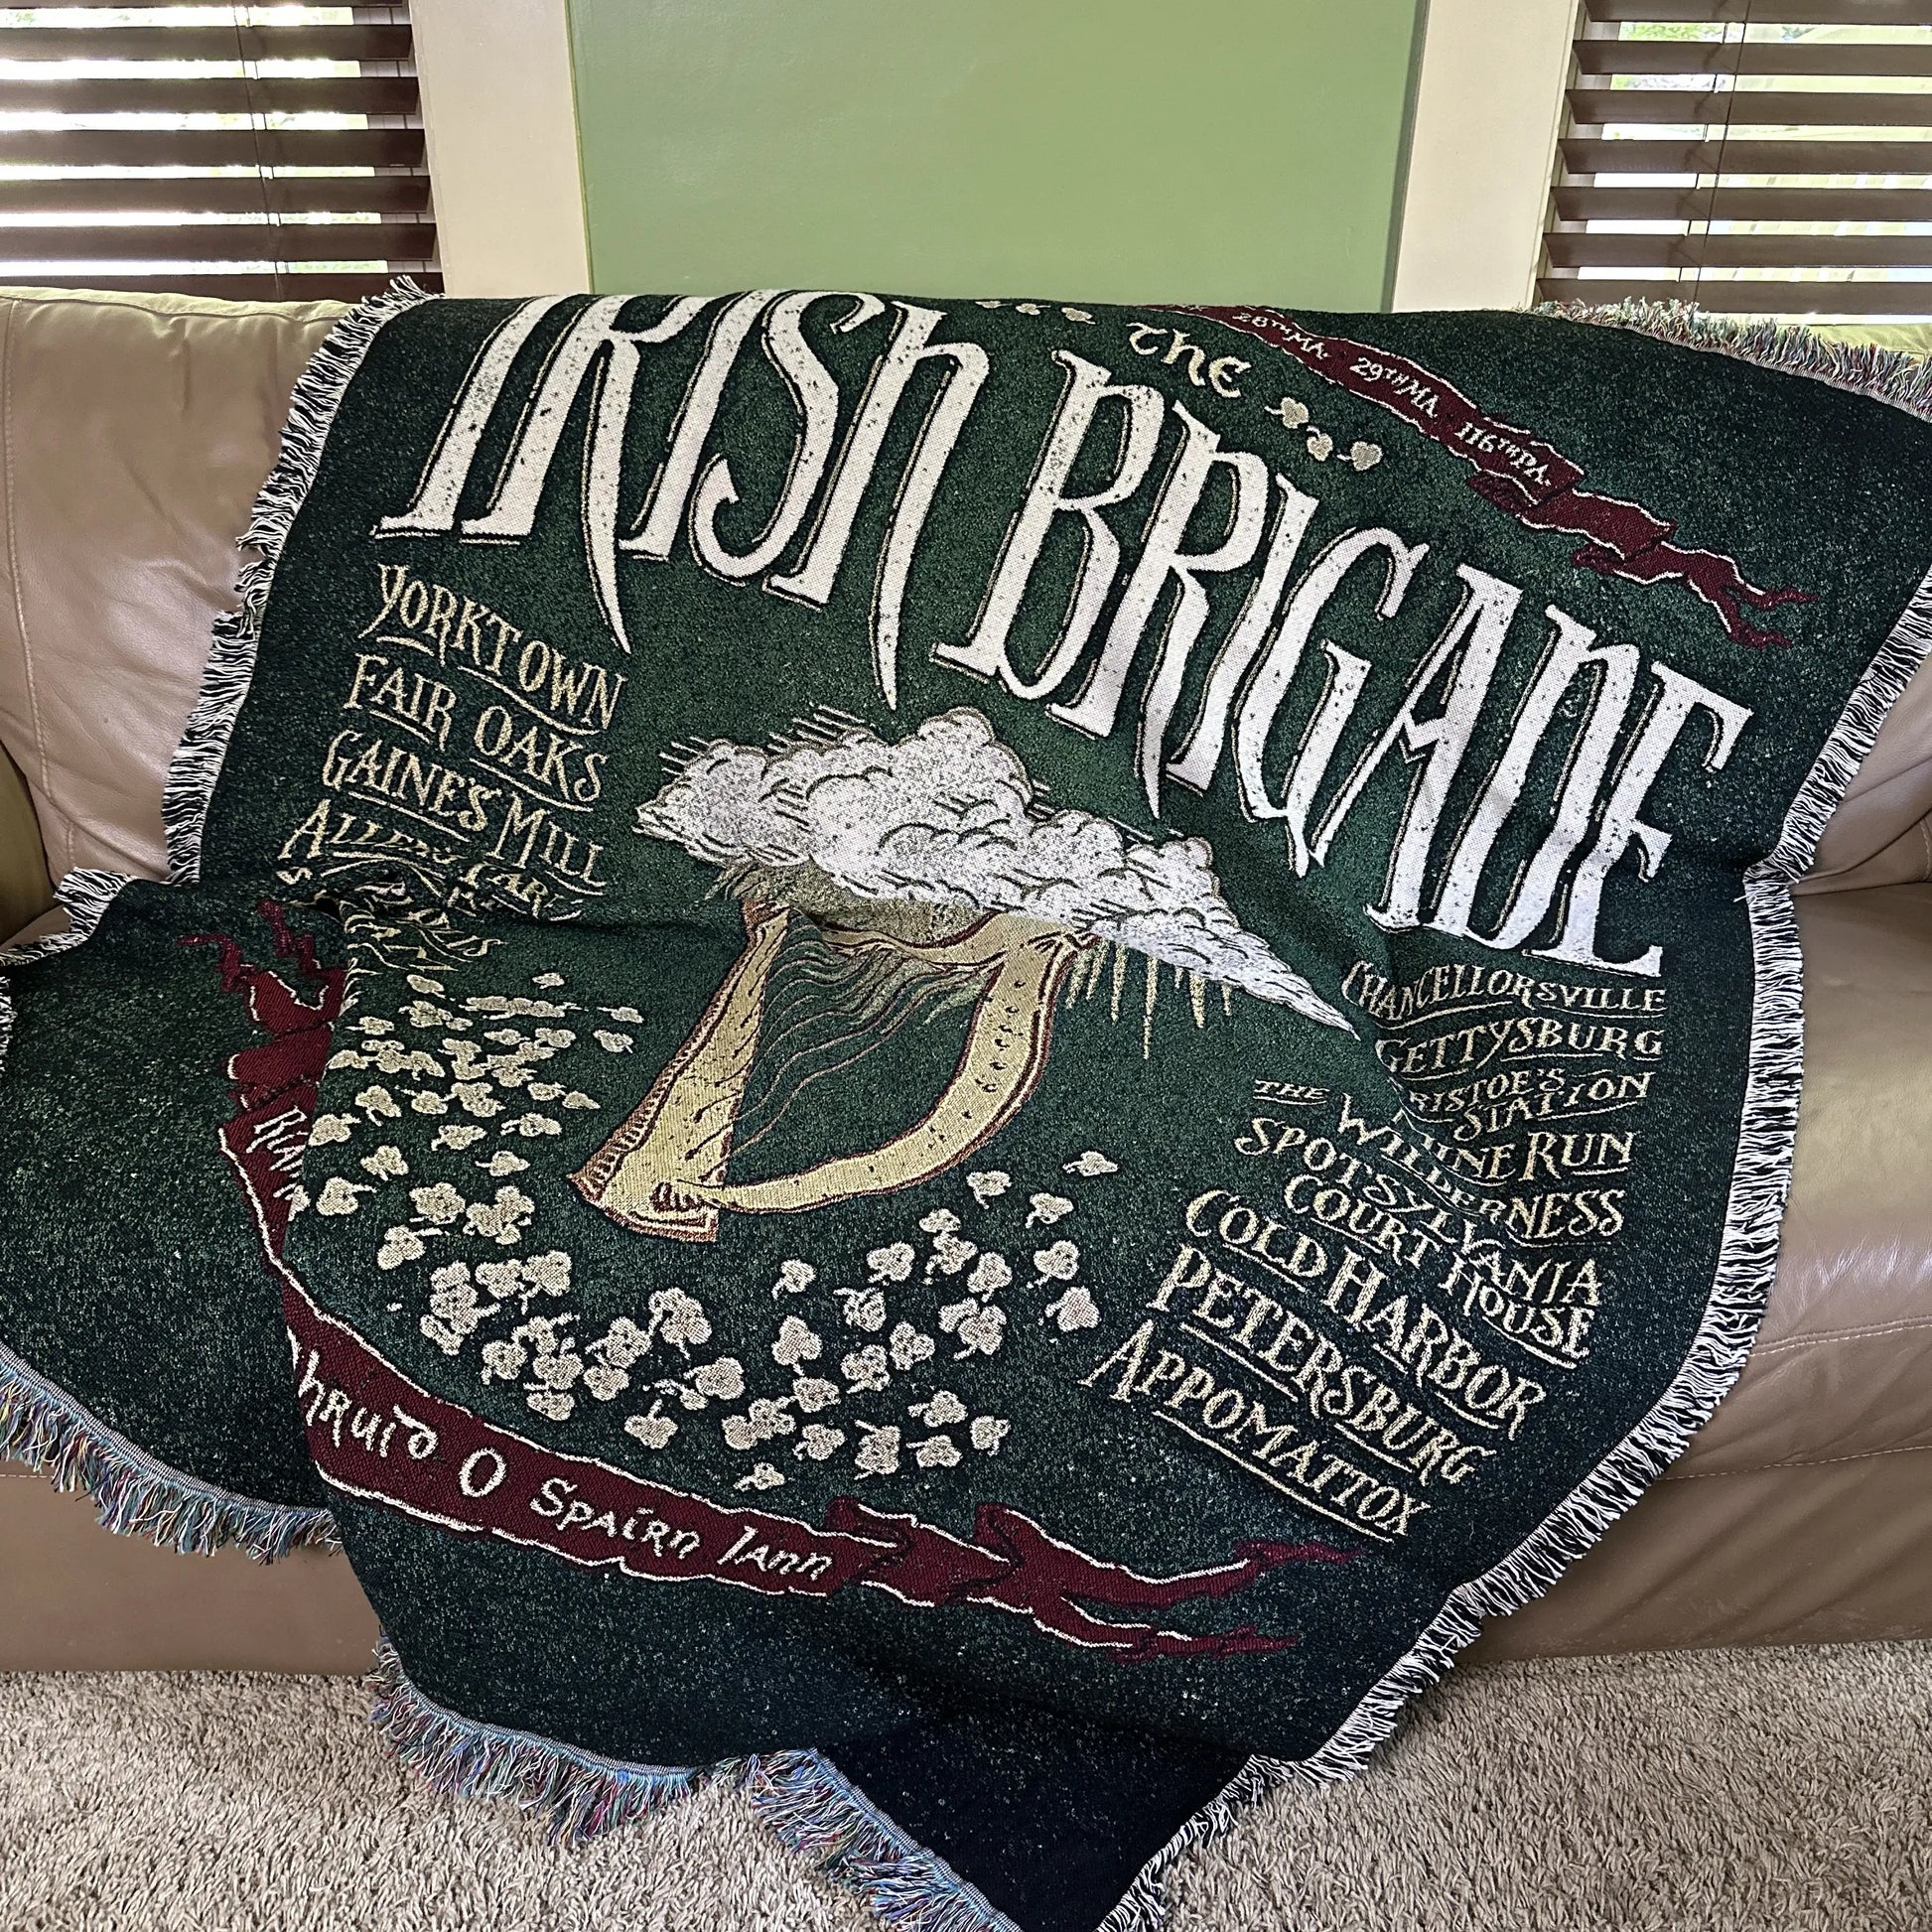 The Civil War "Irish Brigade" woven blanket — Made in America from The History List store on the couch